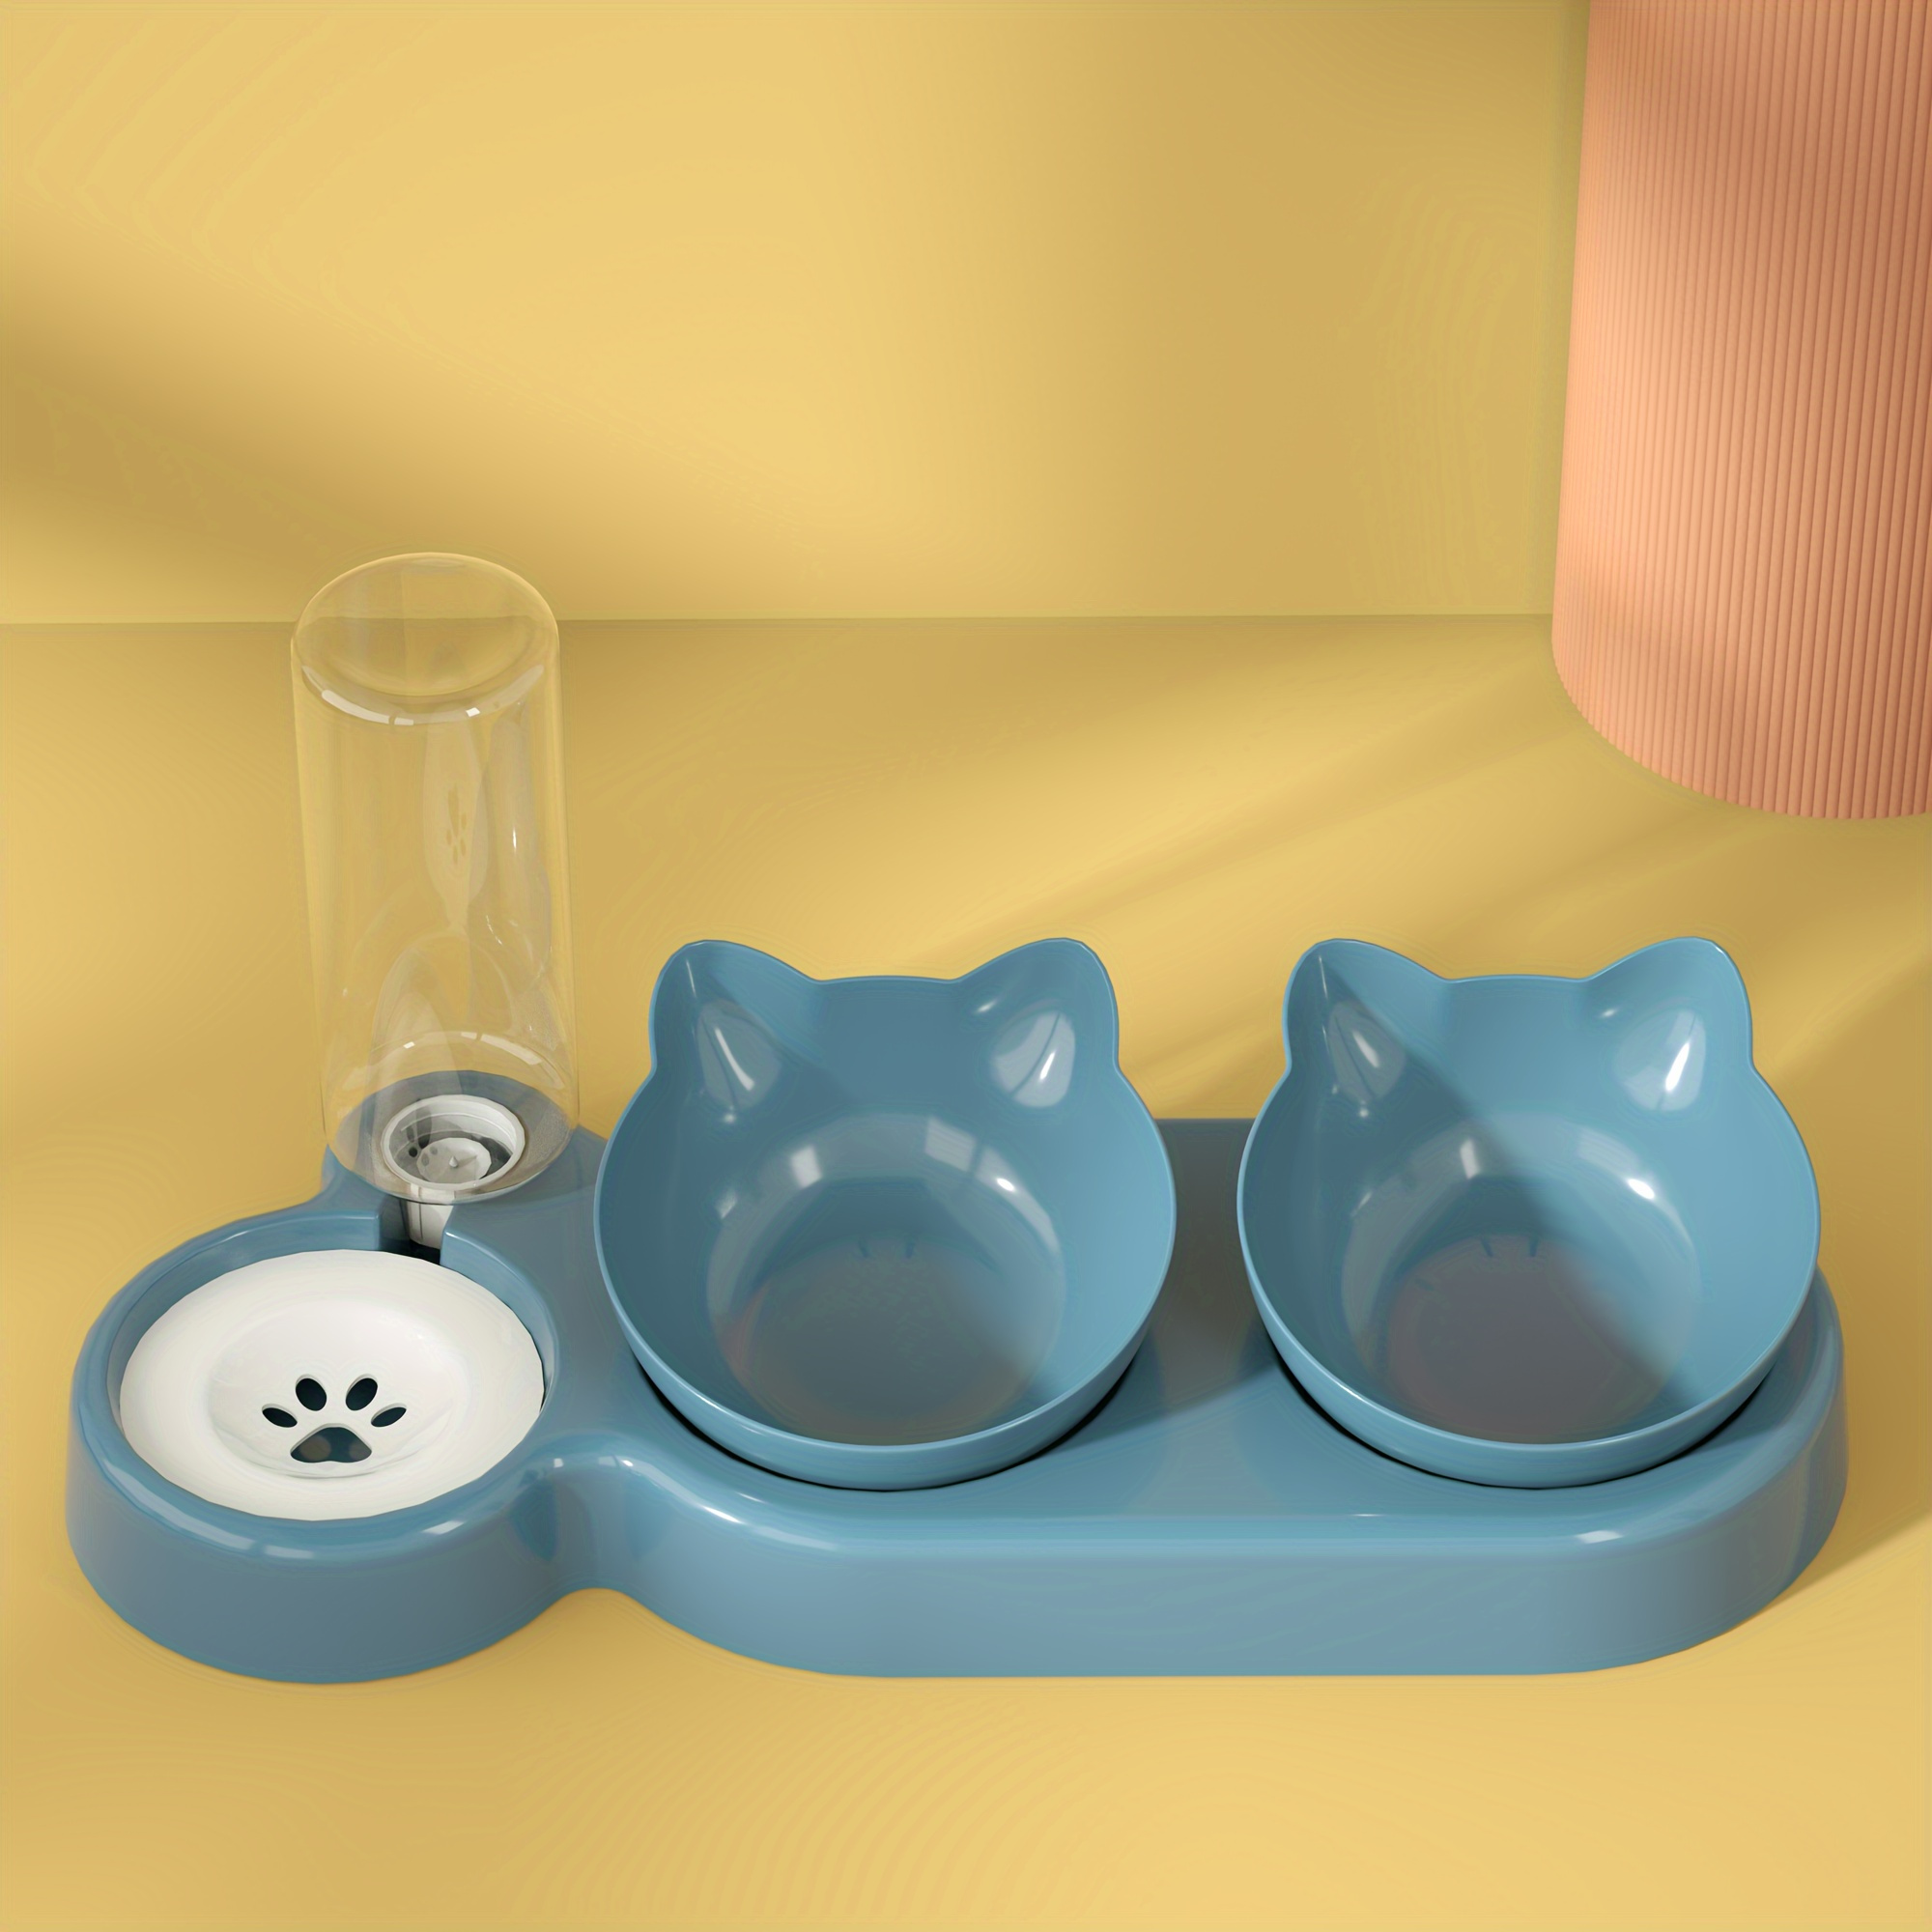 

3-in-1 Cat Feeding Station With Automatic Water Dispenser - Non-slip, Easy Clean Plastic Bowls For Cats